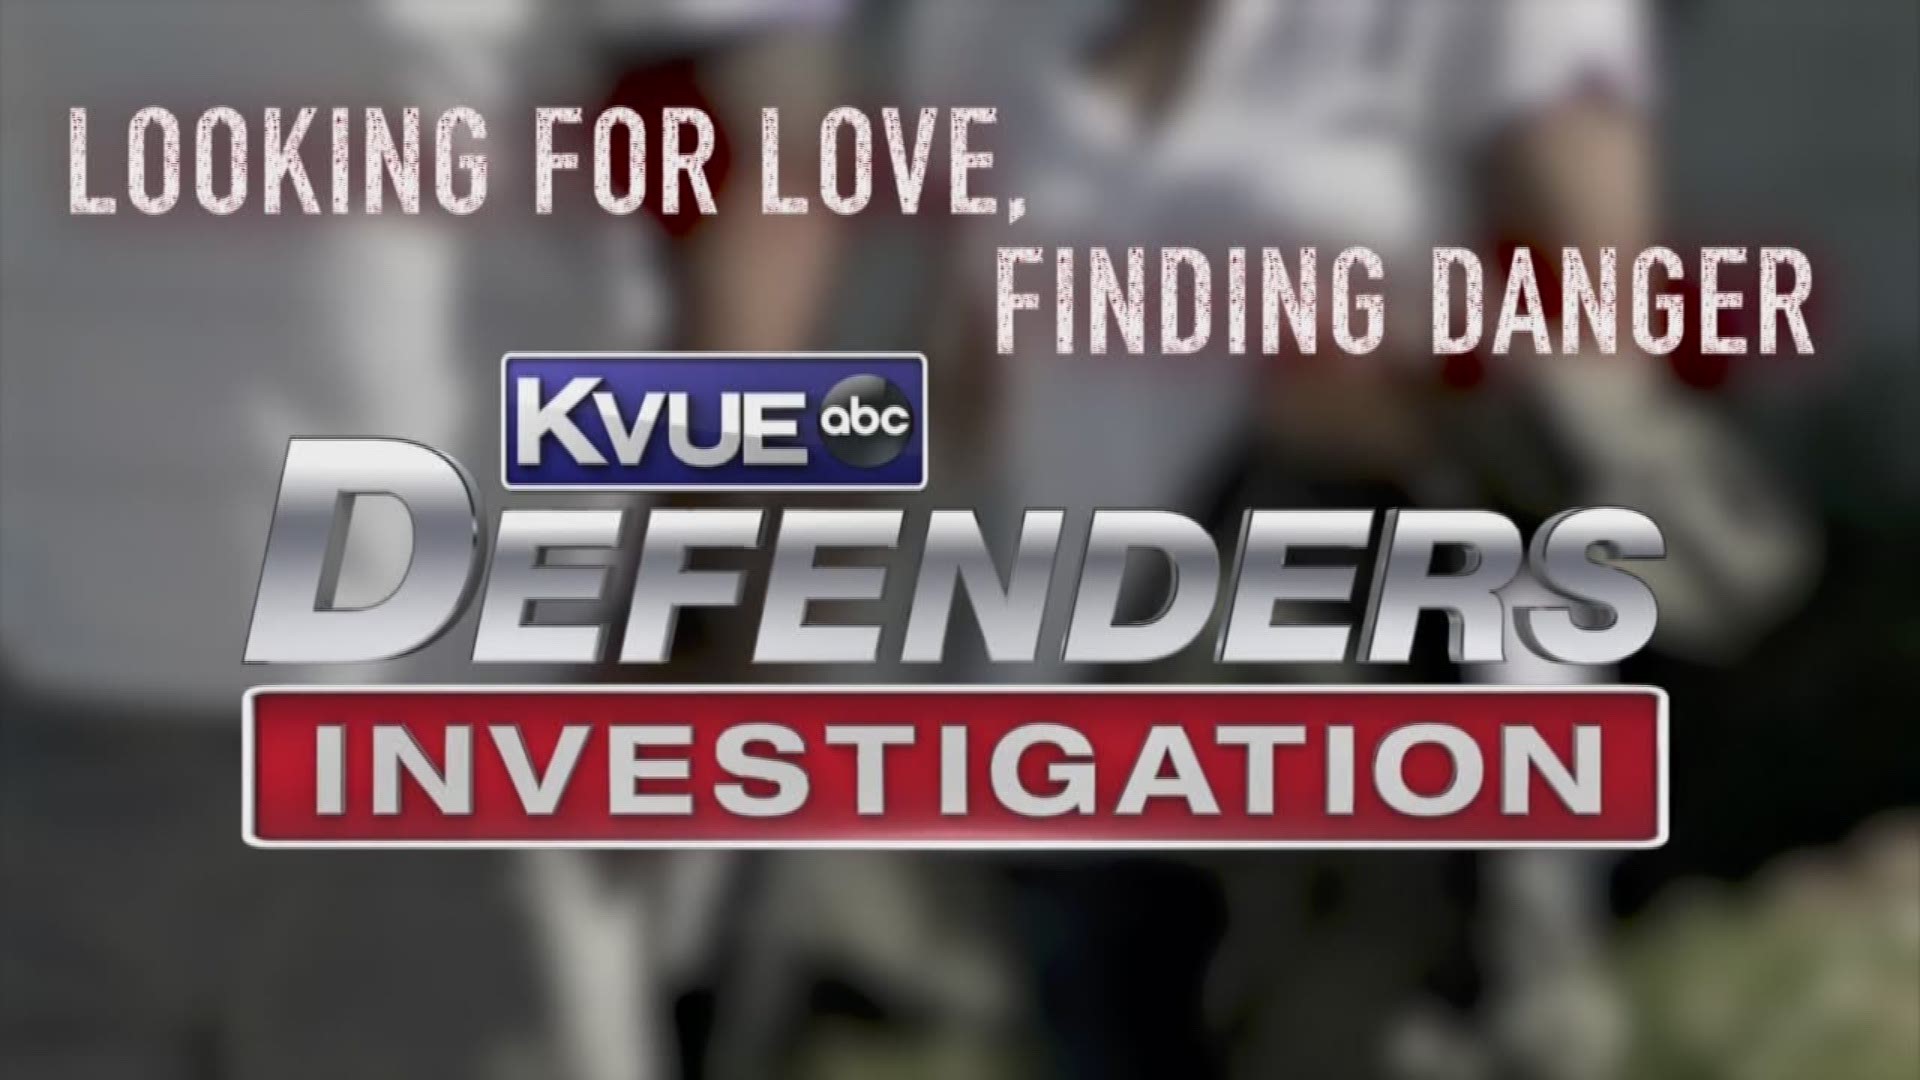 The KVUE Defenders found the dangers in online dating presents itself in many forms.